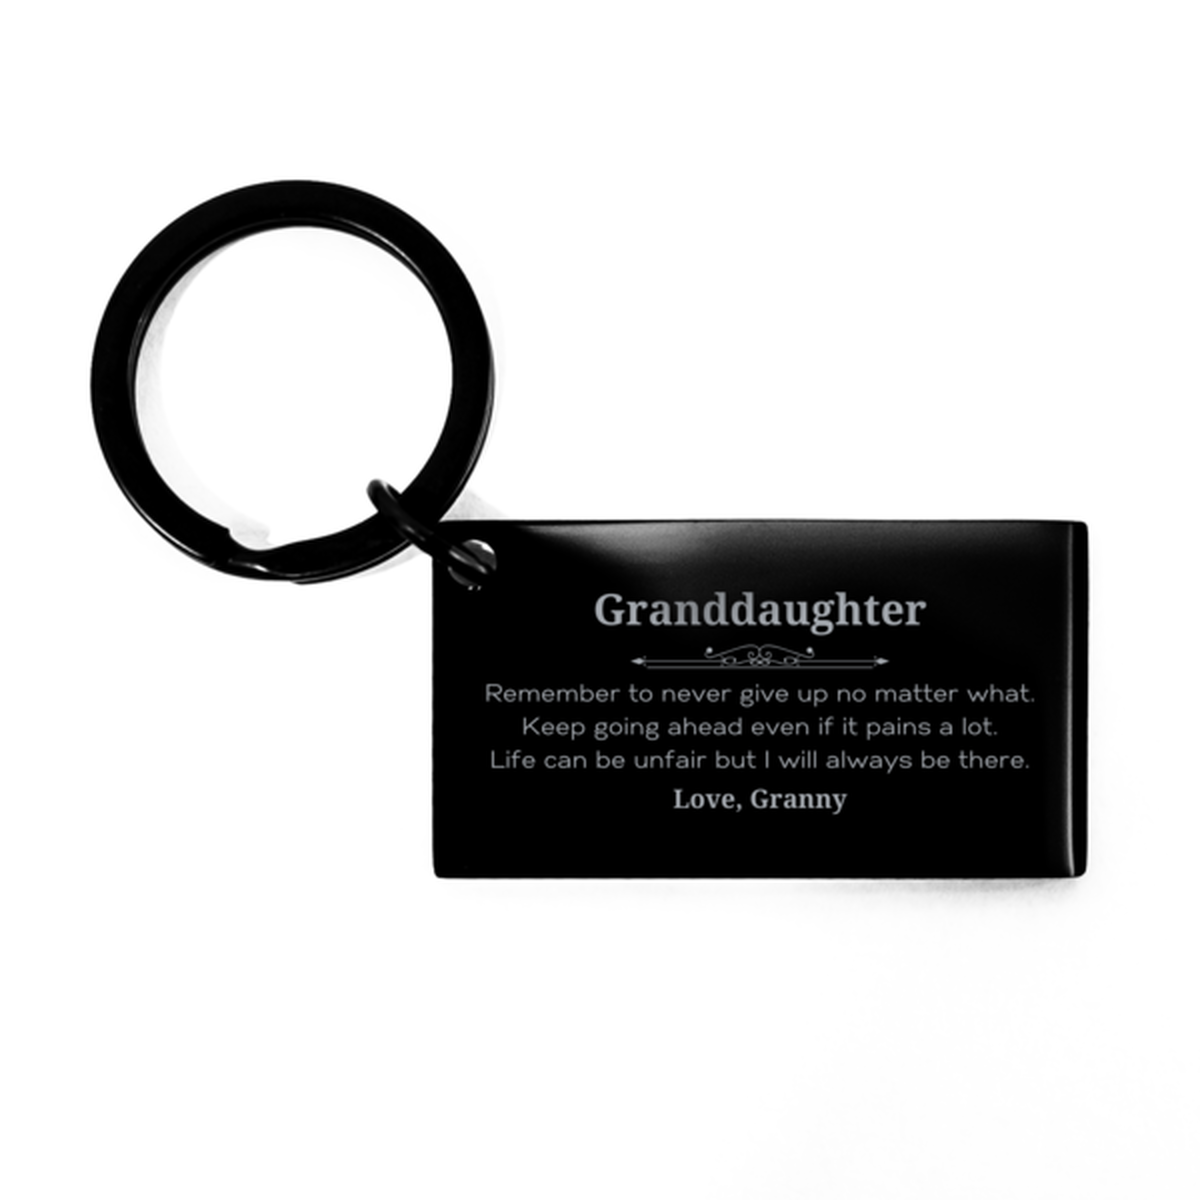 Granddaughter Motivational Gifts from Granny, Remember to never give up no matter what, Inspirational Birthday Keychain for Granddaughter